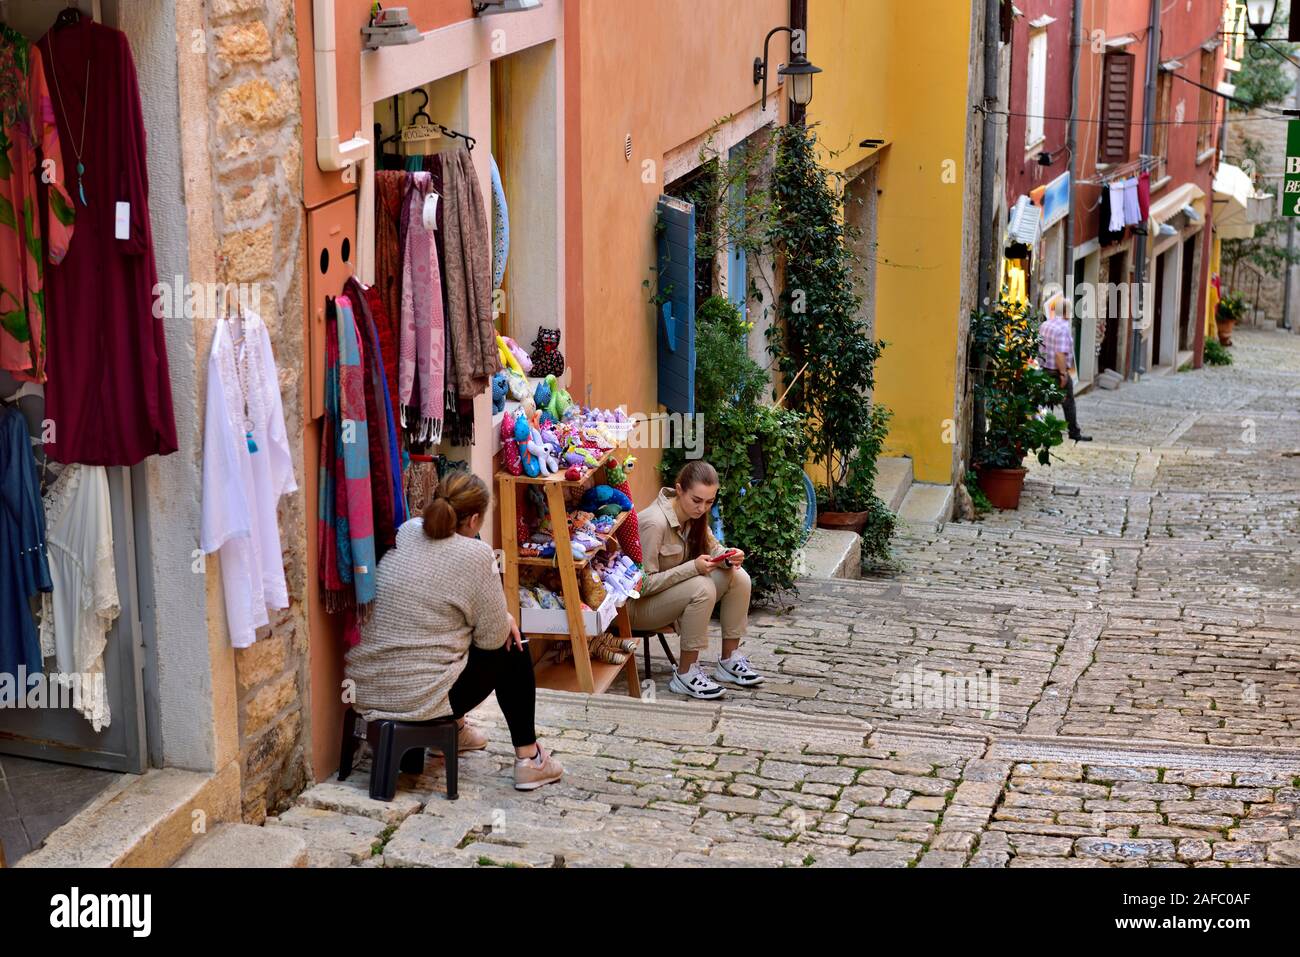 Small cobblestone pedestrian street with steps, small shops, shopkeepers relaxing outside, Rovinj, Croatia Stock Photo